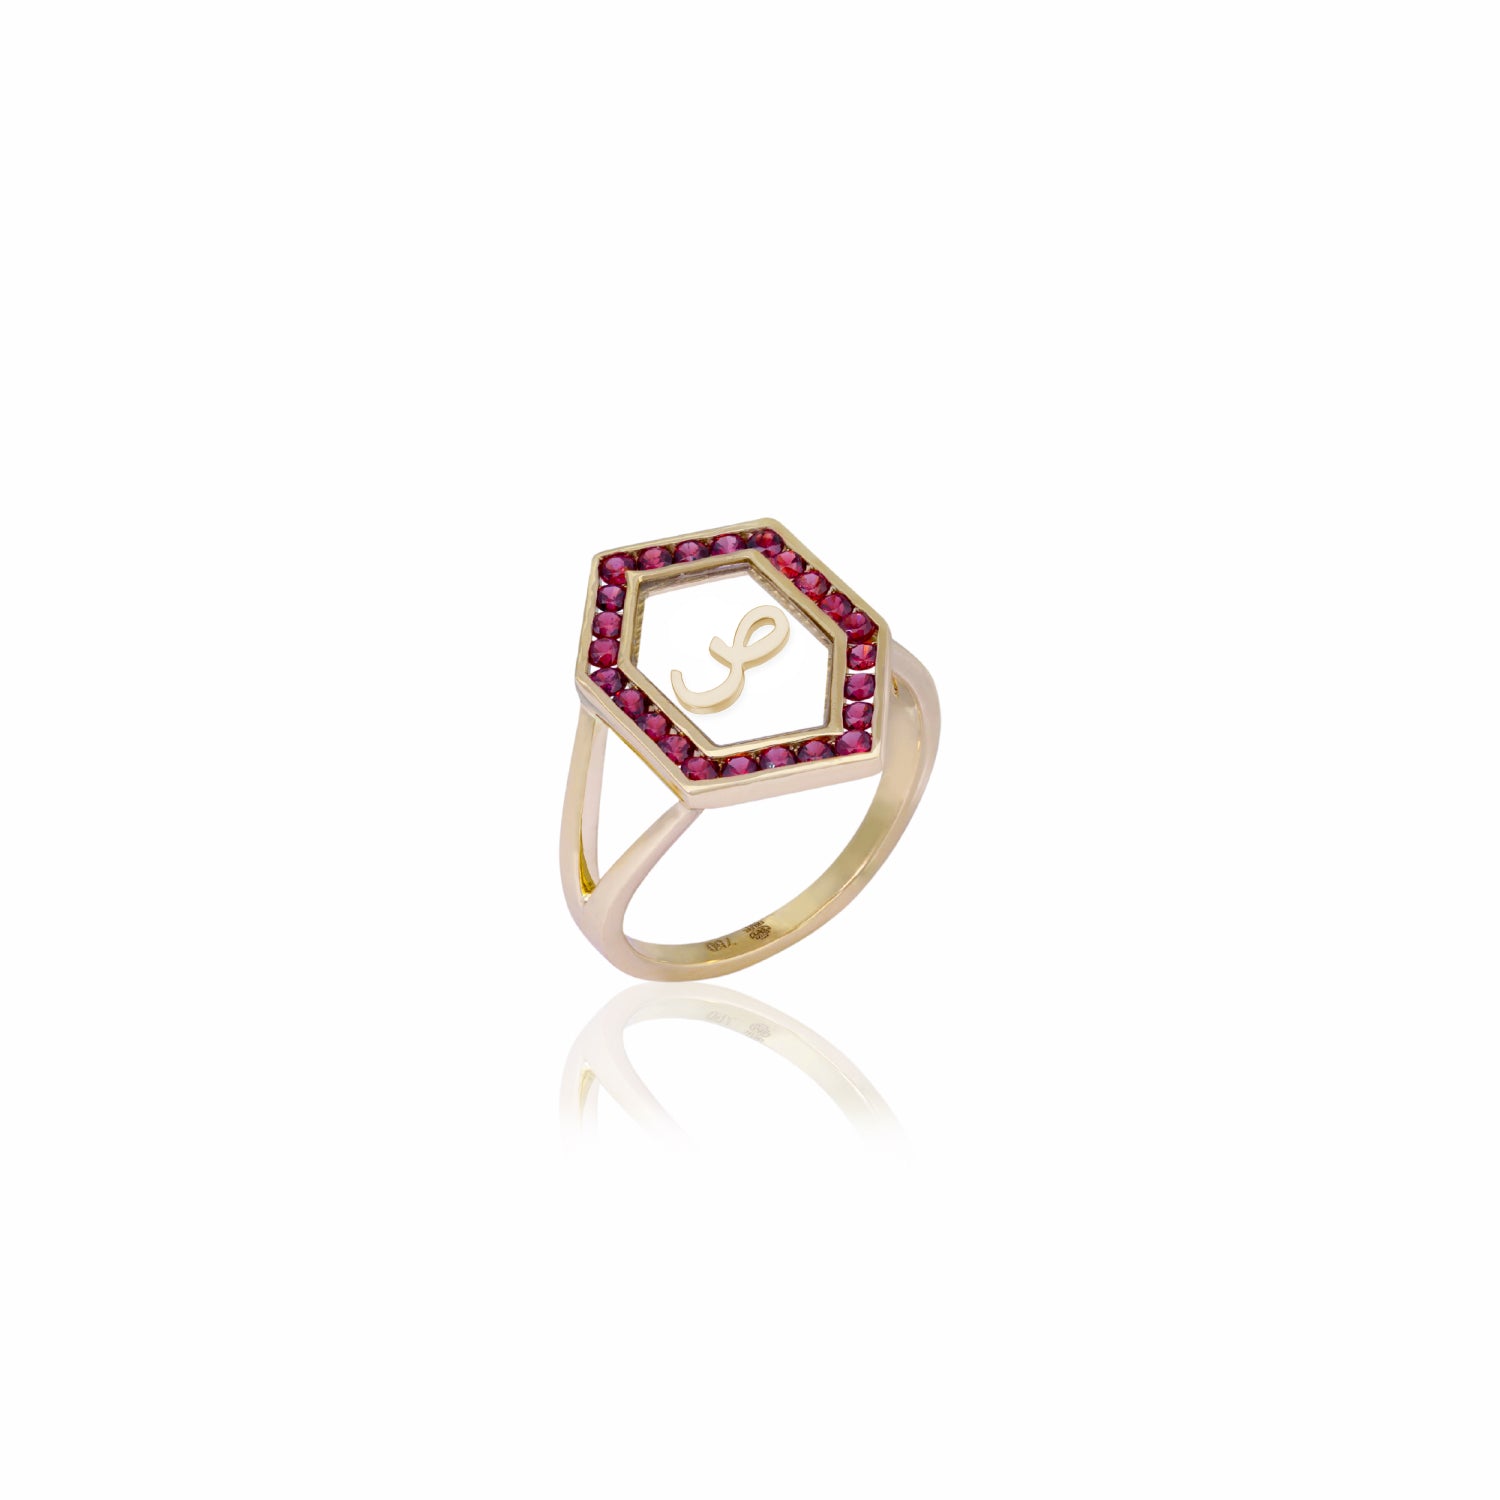 Qamoos 1.0 Letter ص Ruby Ring in Yellow Gold